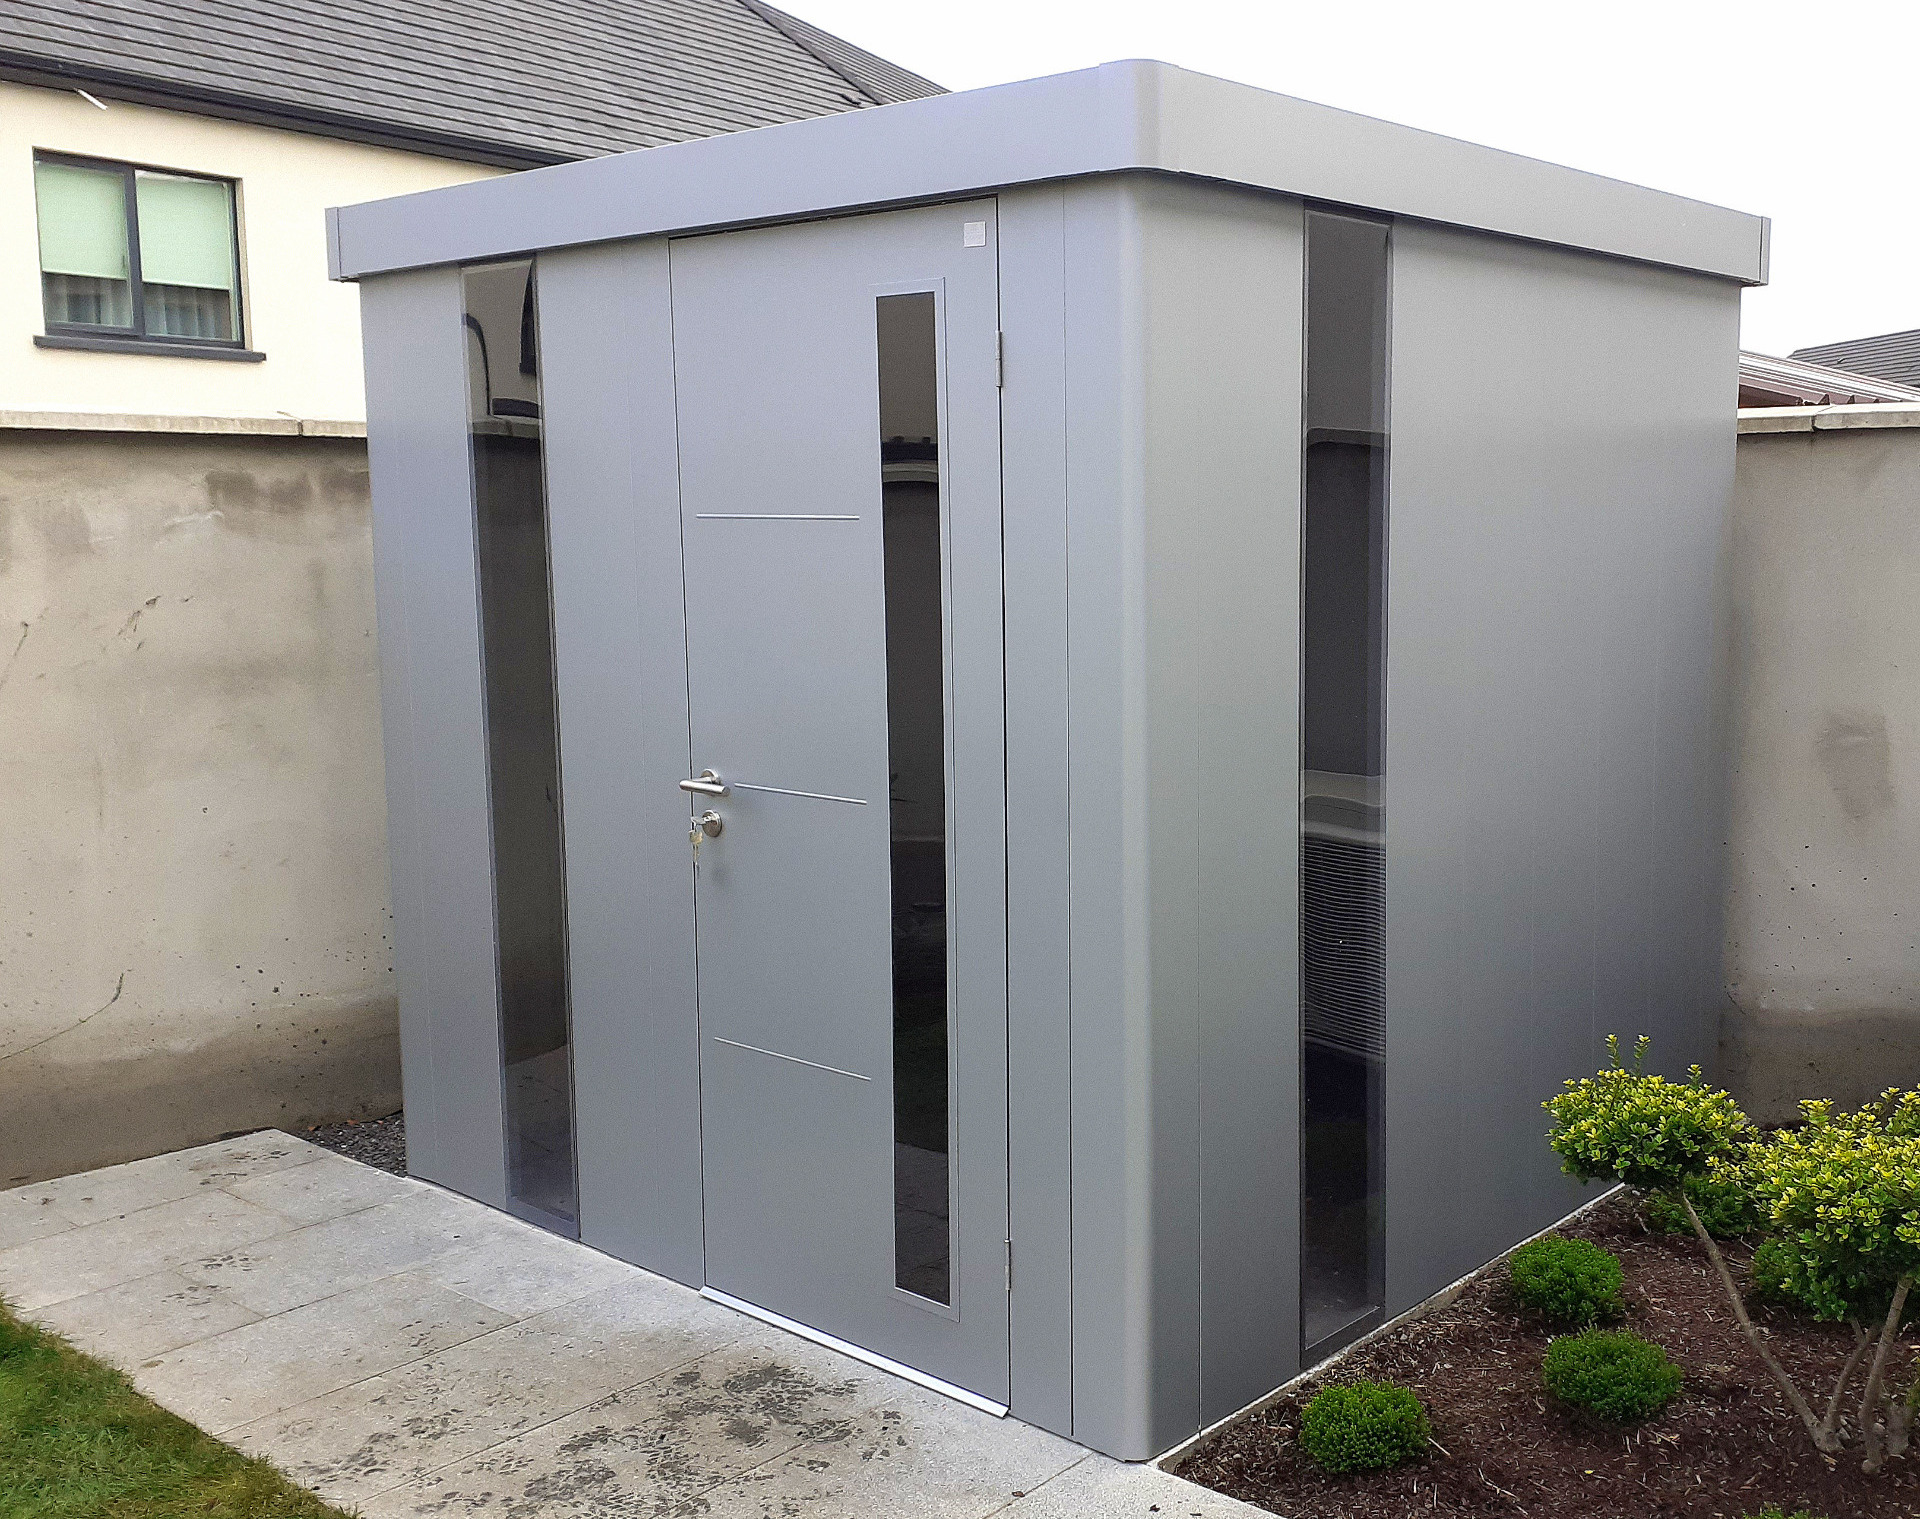 Biohort NEO 2B Garden Shed  in metallic silver | Supplied + Fitted in Portmarnock, Dublin  13  by Owen Chubb Landscapers, Ireland's # 1 Supplier & Installer of Biohort Garden Sheds & Storage Solutions